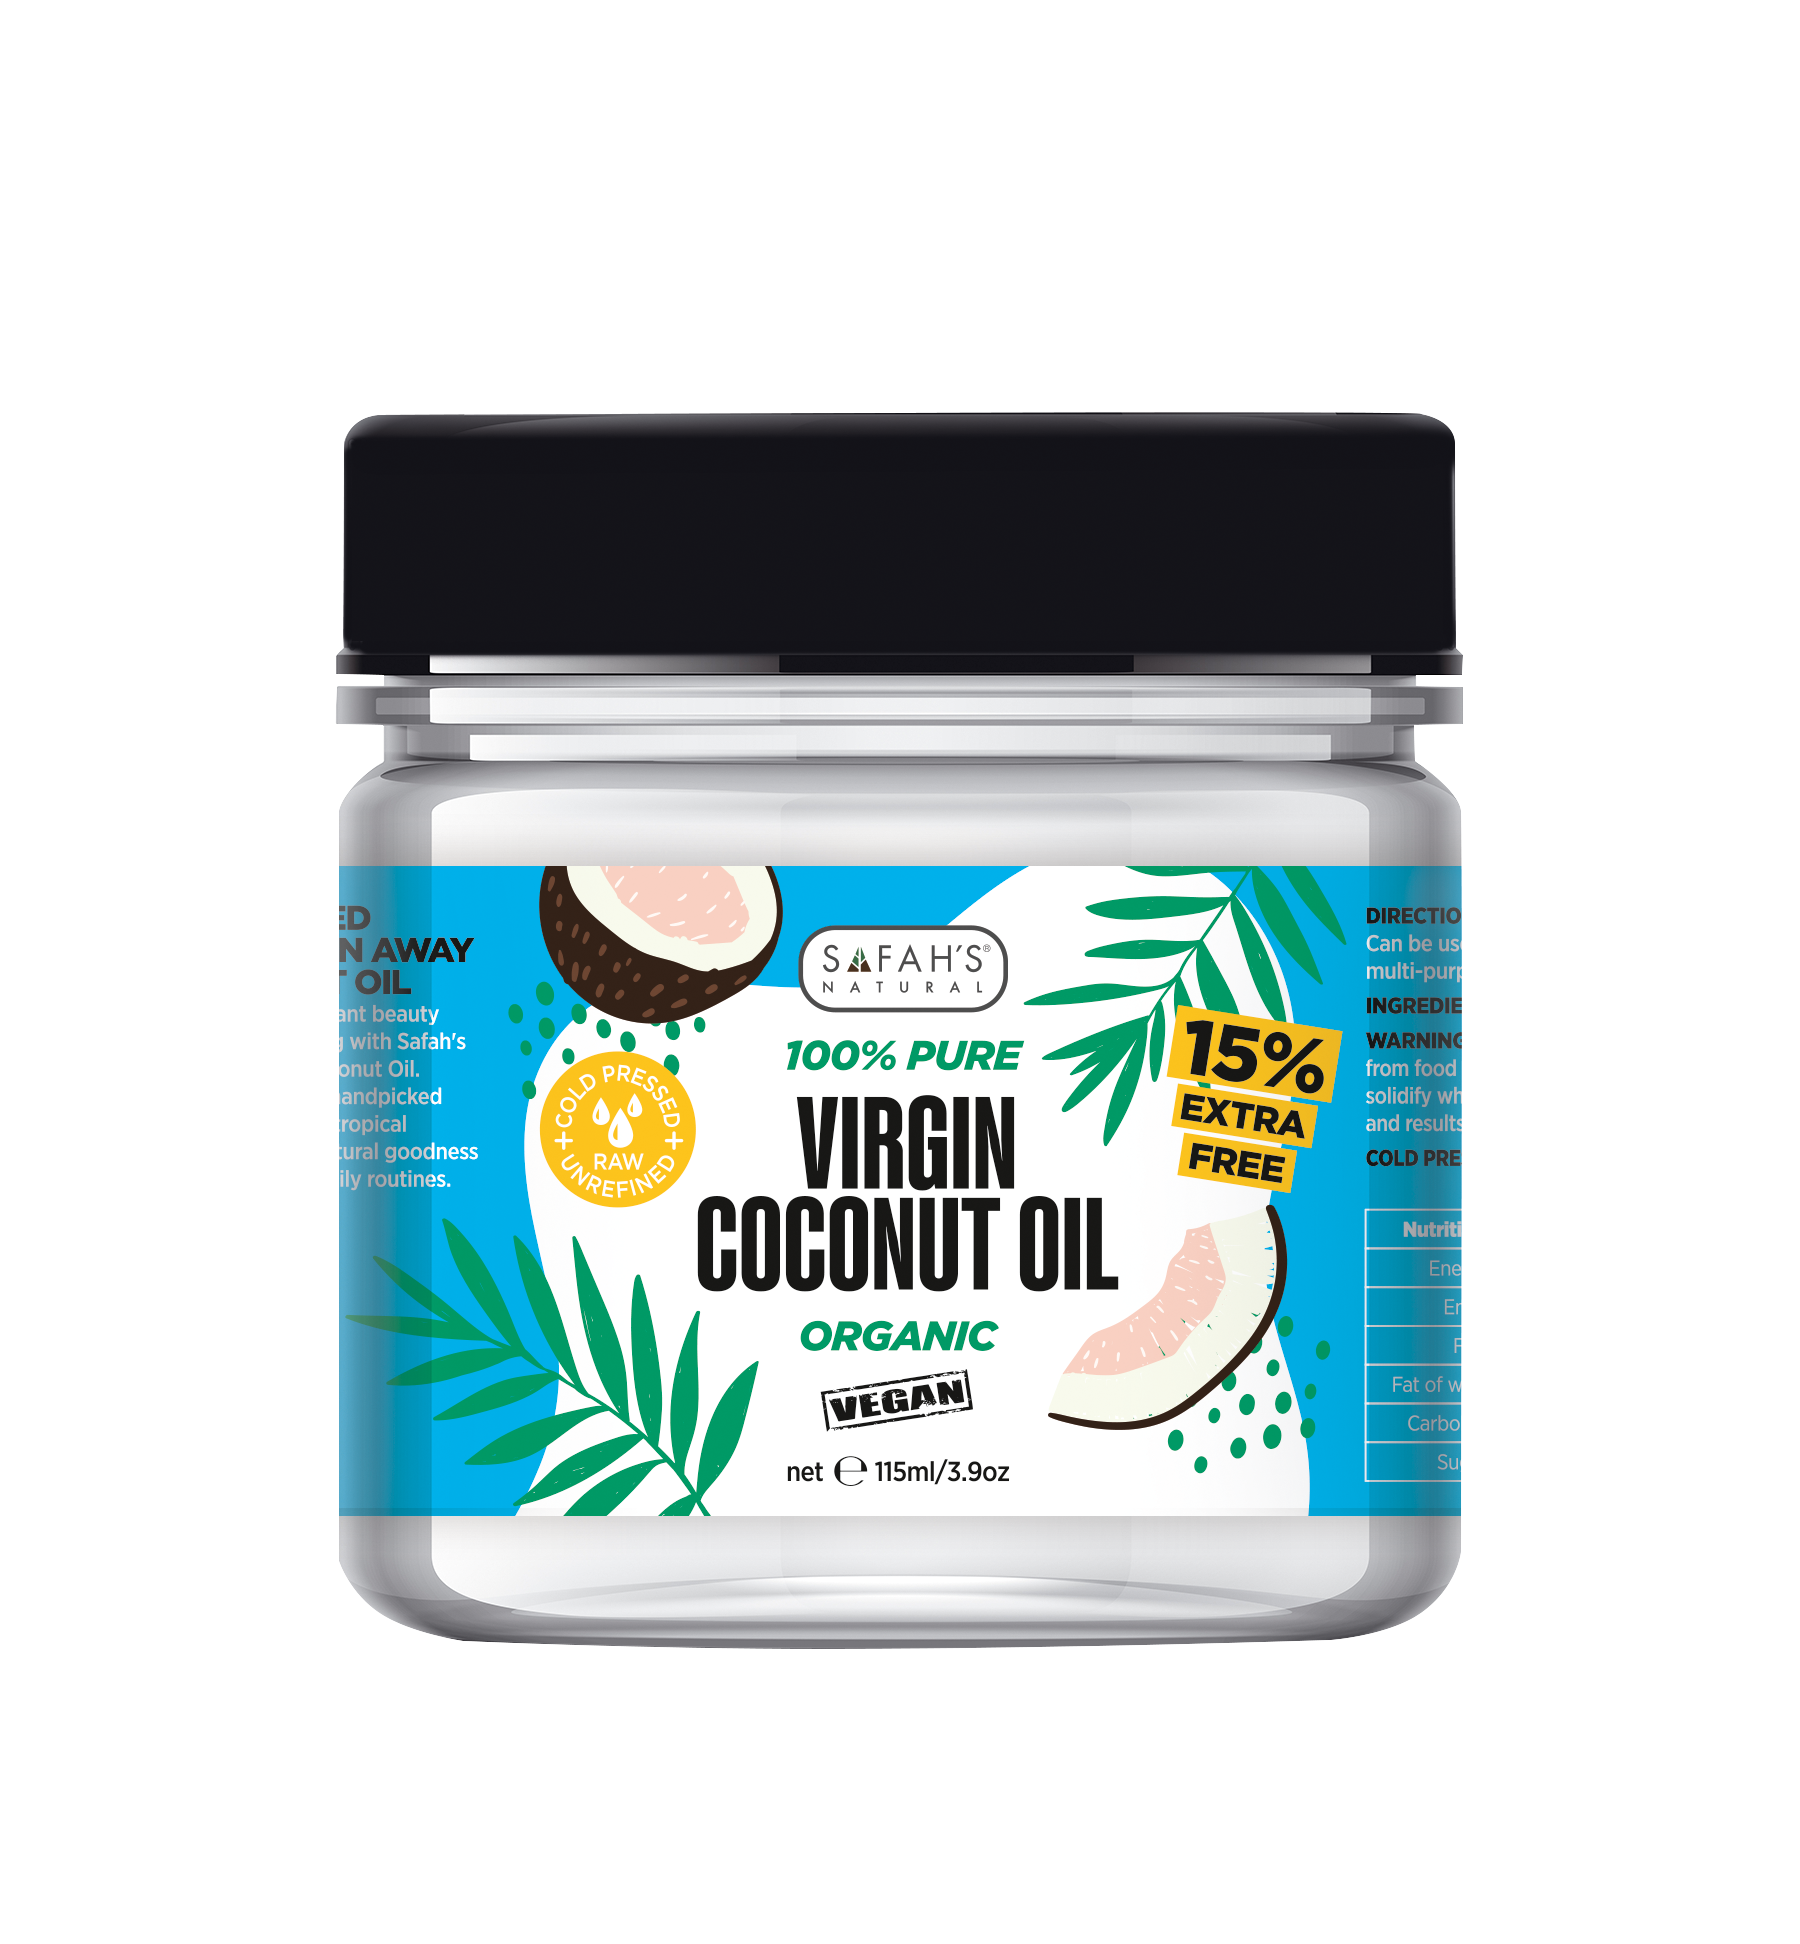 Organic Coconut oil 100% pure - Jar of Purity for Beauty and Wellbeing